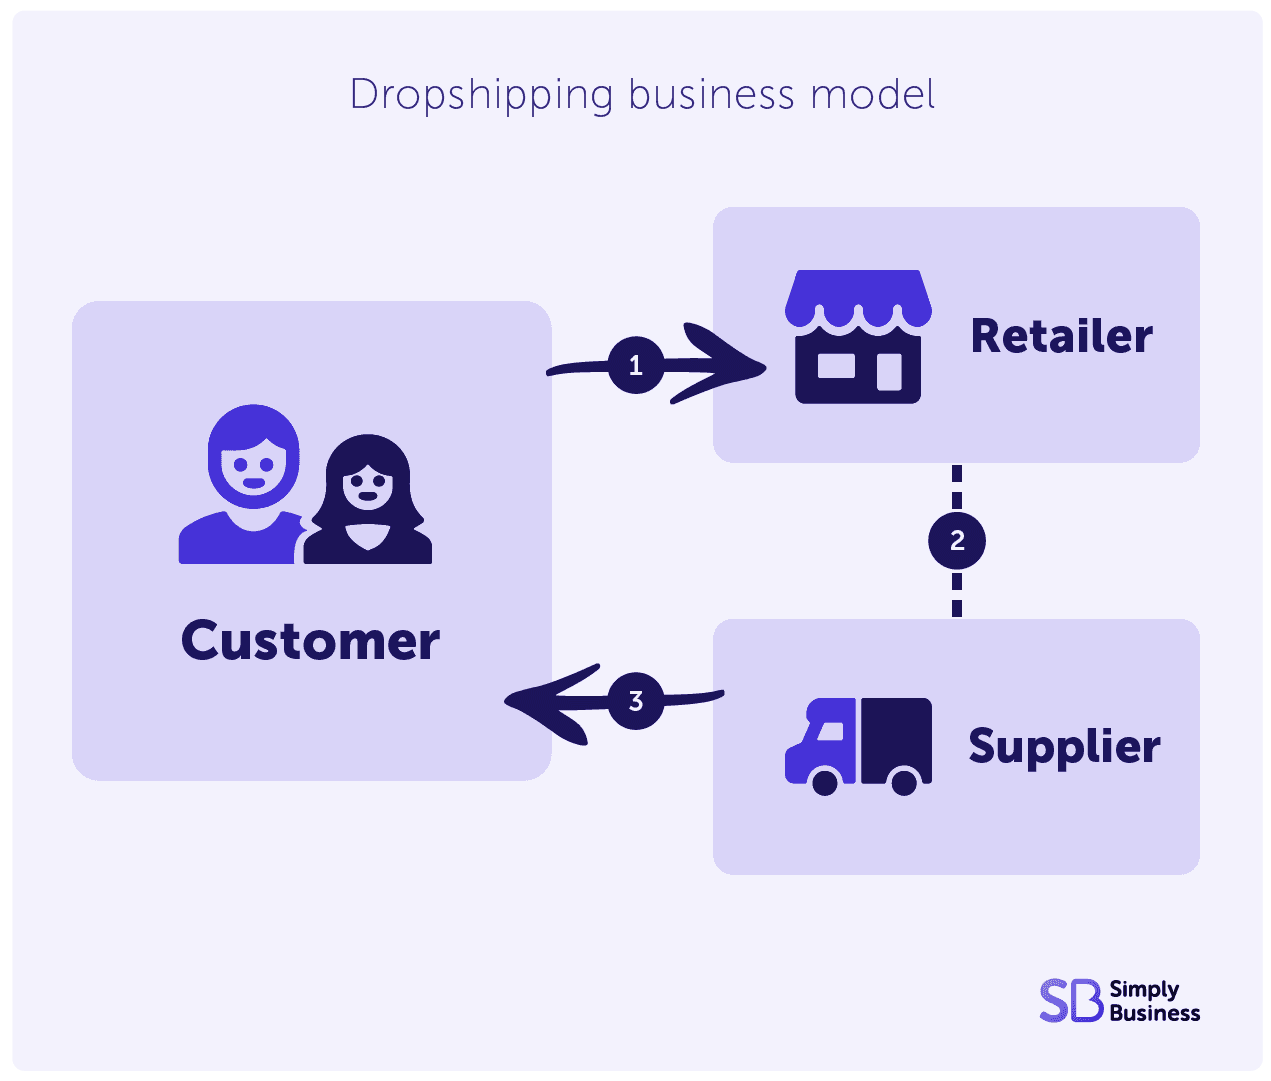 Dropshipping business model explanation for small businesses